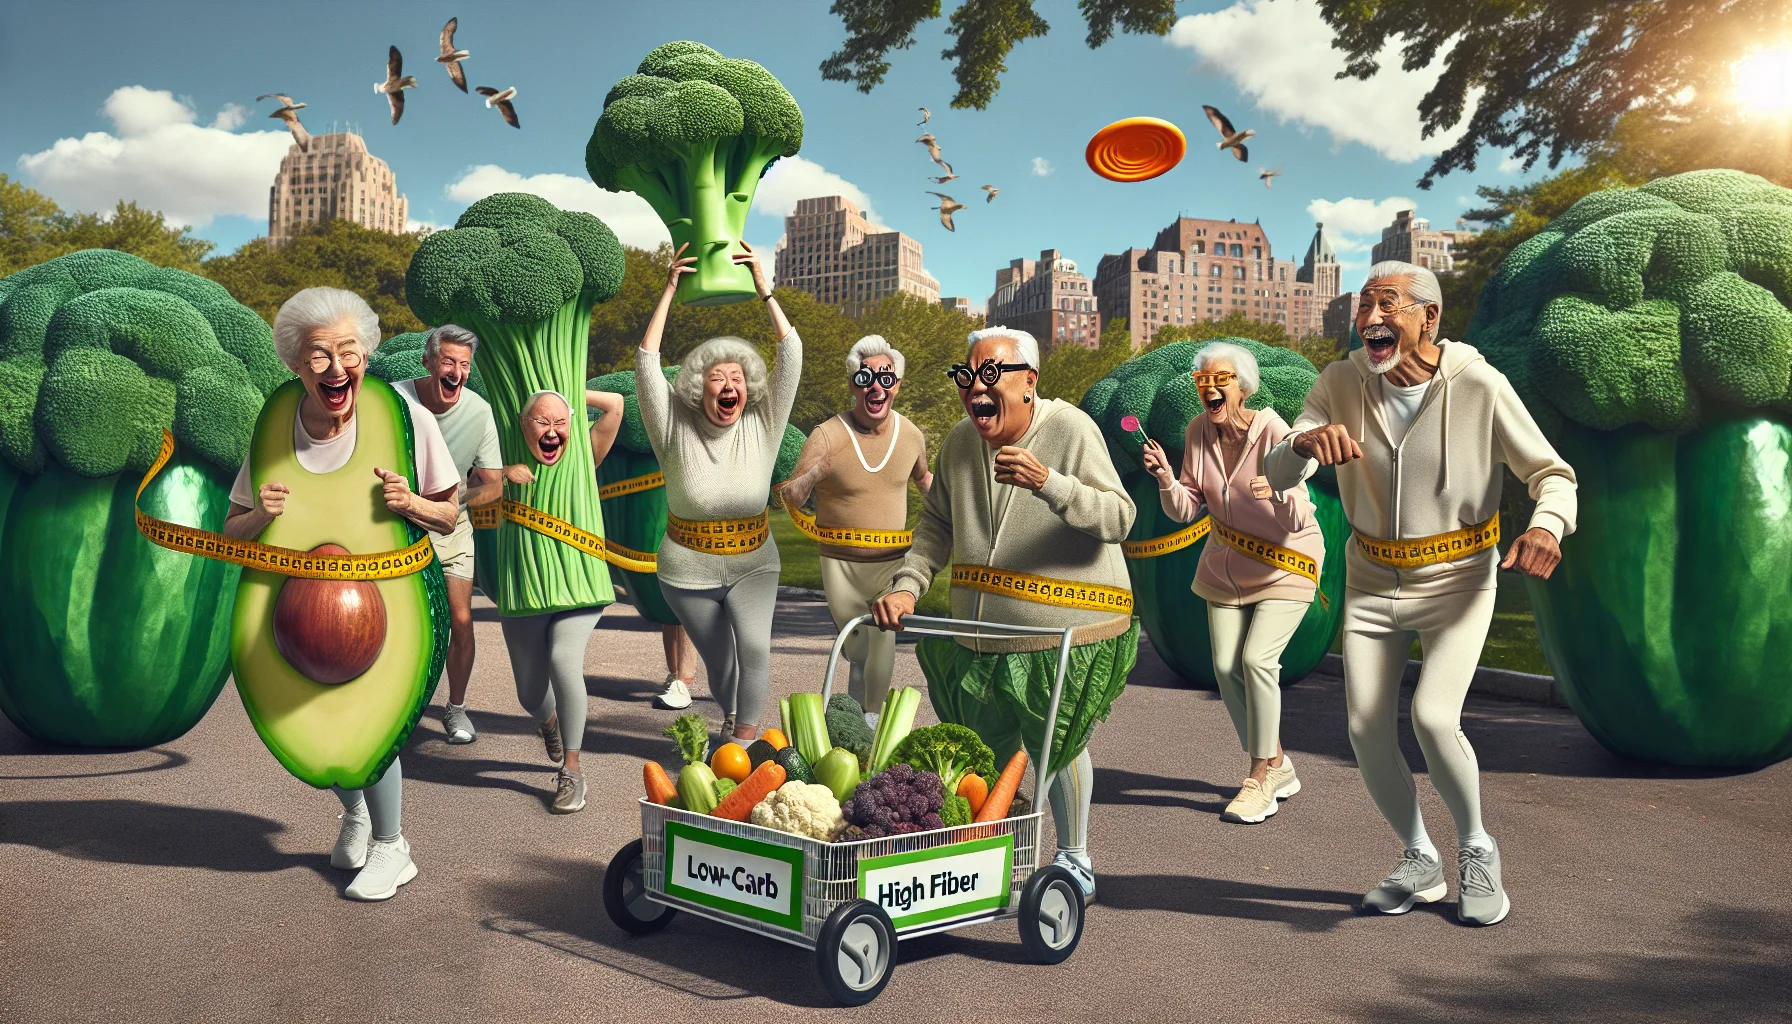 Imagine a humorous, realistic scene involving elderly individuals and the theme of diets and healthy eating. In a sunny park, a group of seniors are engaging in a lively low-carb, high fiber food party. Equipped with jogging suits, they are animatedly comparing sizes of giant broccoli spears, waving celery like batons and tossing avocadoes like frisbees. A Caucasian elderly lady with humorous glasses is using a large lettuce leaf as a fan, while an Asian senior man laughs heartily holding a giant cucumber like a microphone. A black gentleman is seen riding a high fiber food cart filled with assortment of fibrous vegetables. Add a hint of surrealism to make the scene amusing and memorable.